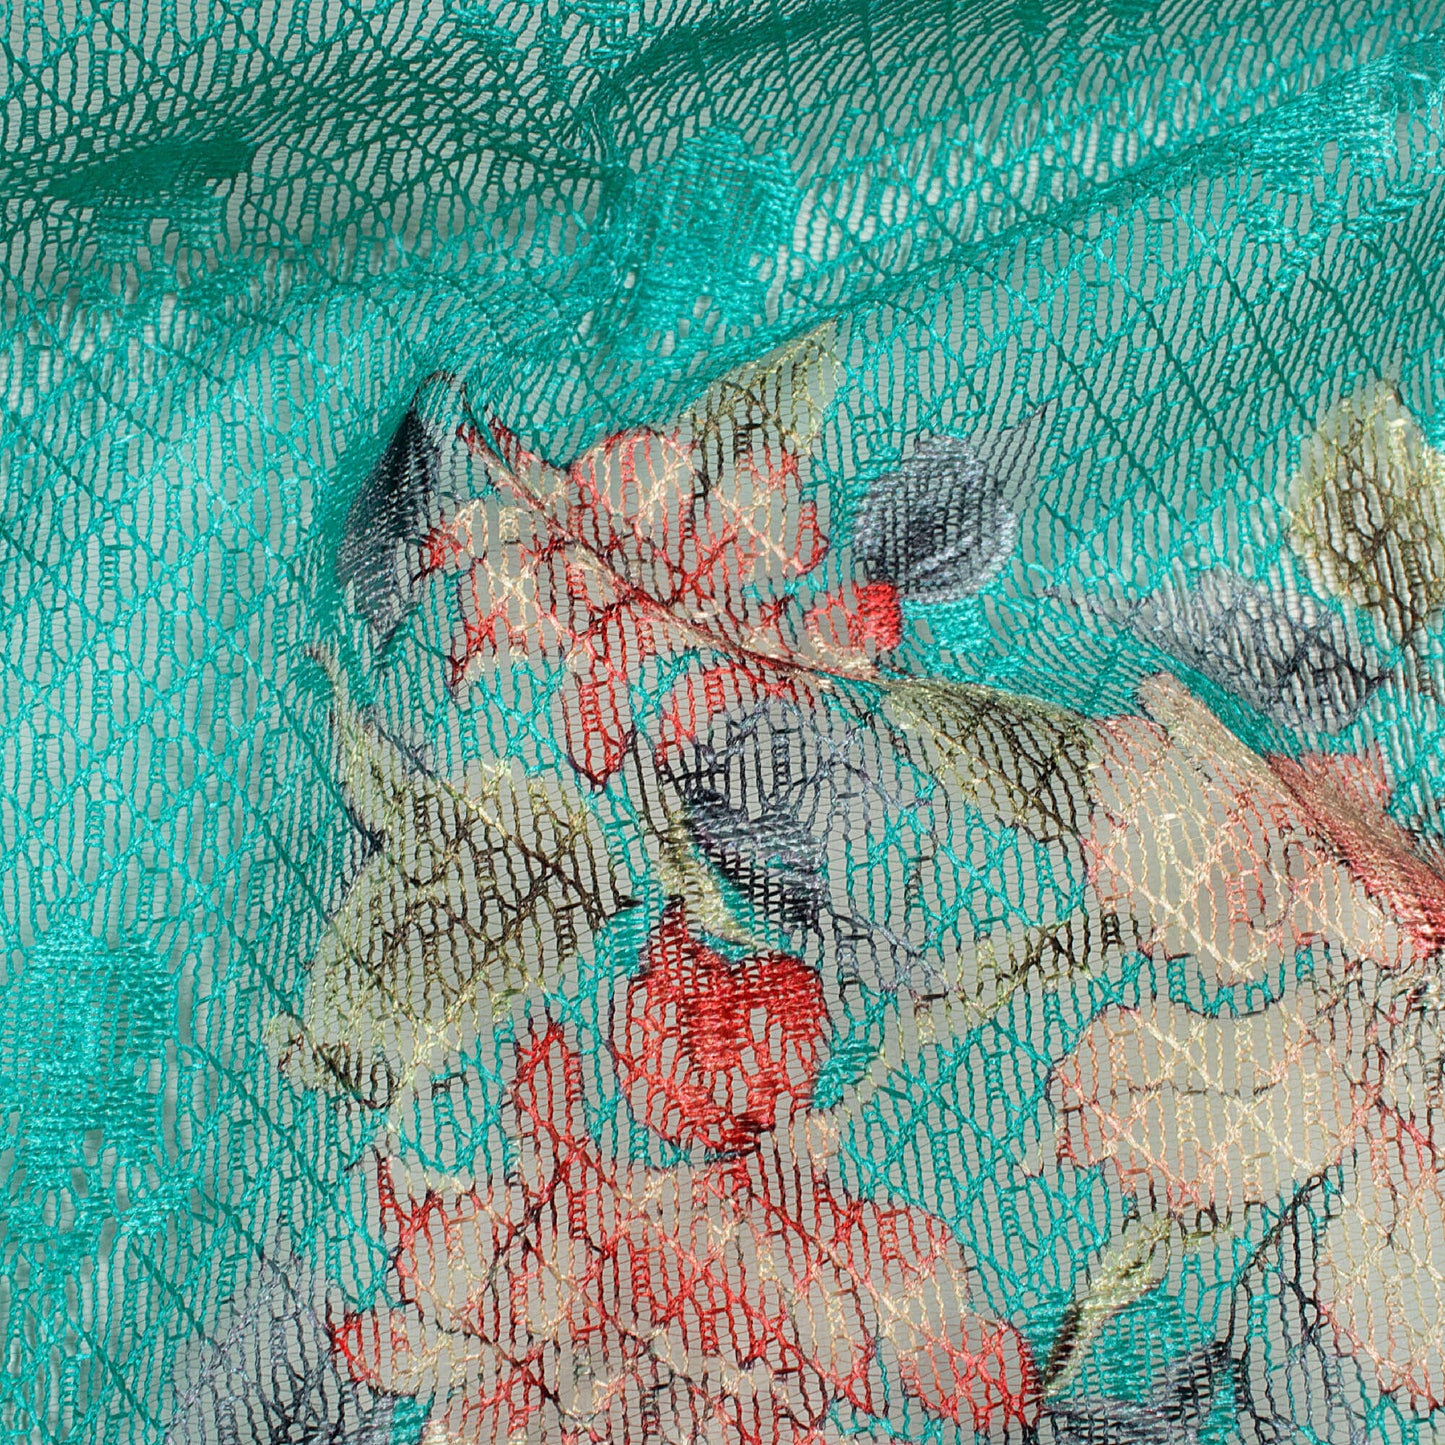 Bright Turquoise And Peach Floral Pattern Digital Print Booti Raschel Net Fabric (Width 58 Inches)